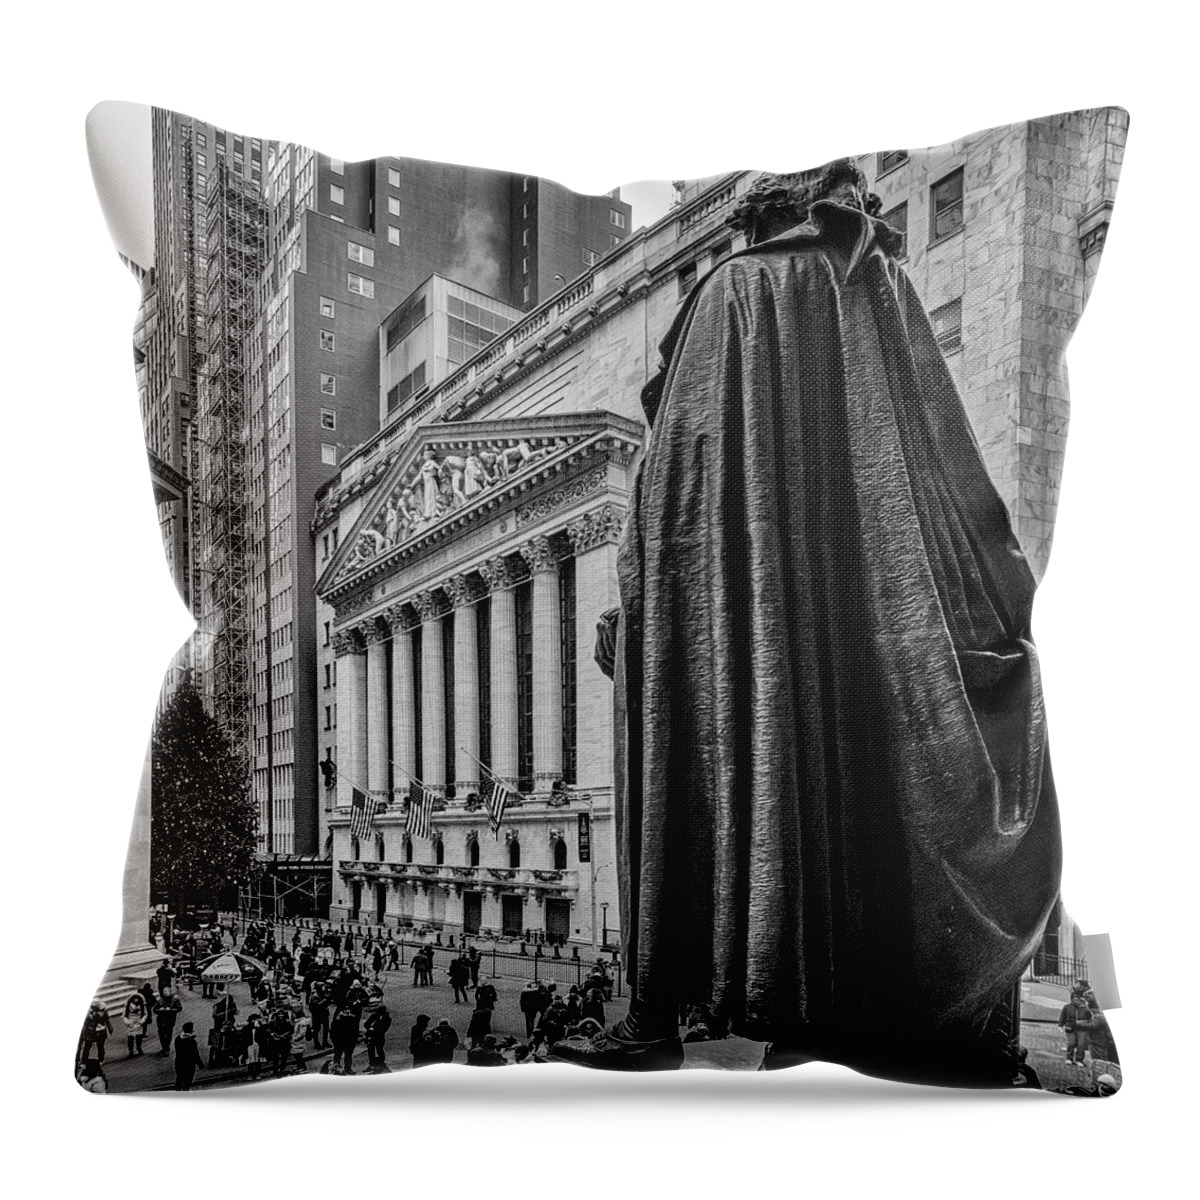 Estock Throw Pillow featuring the digital art Stock Exchange, Wall Street Nyc #8 by Lumiere